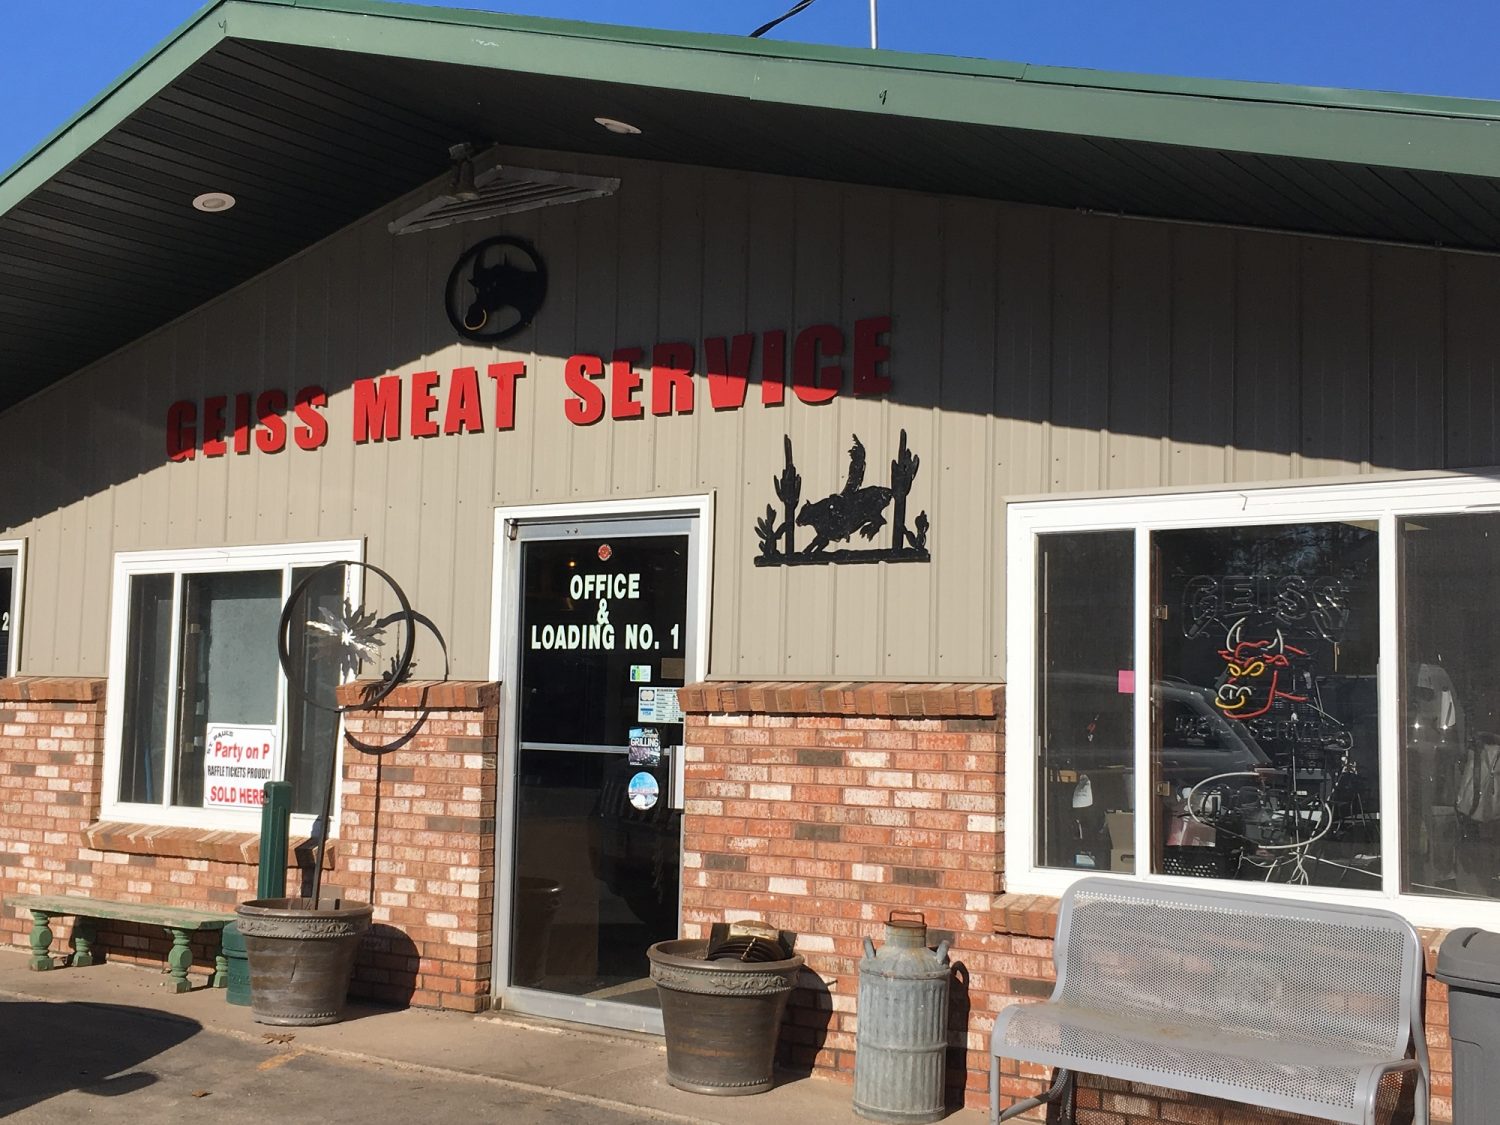 Geiss Meat Service garners accolades at state convention